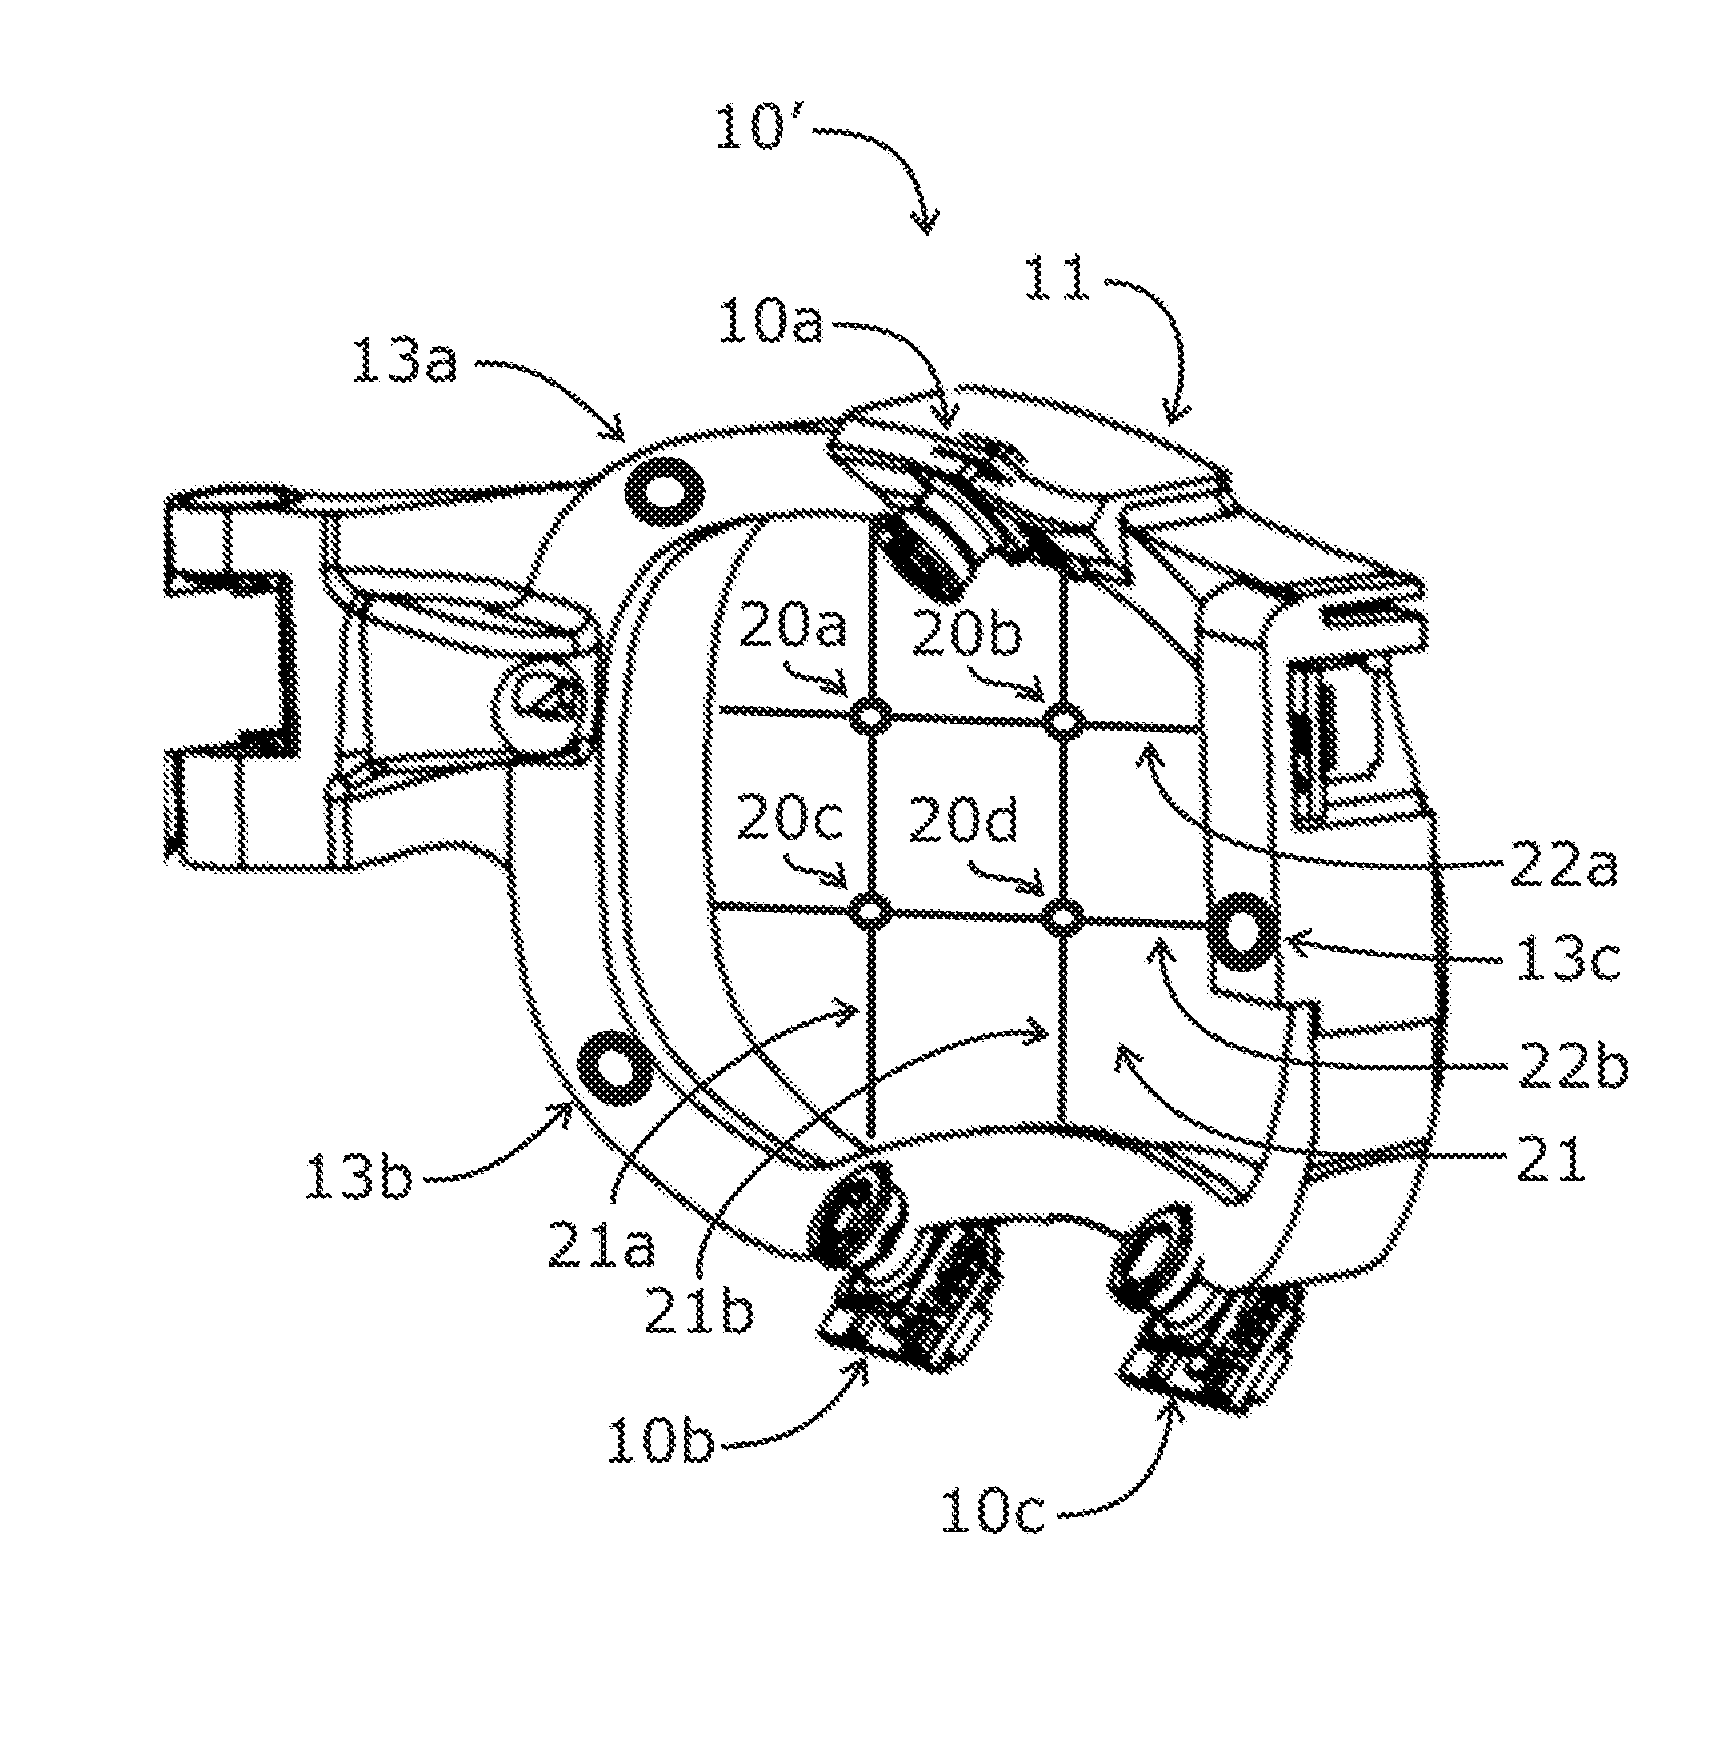 Systems and methods for high-resolution gaze tracking